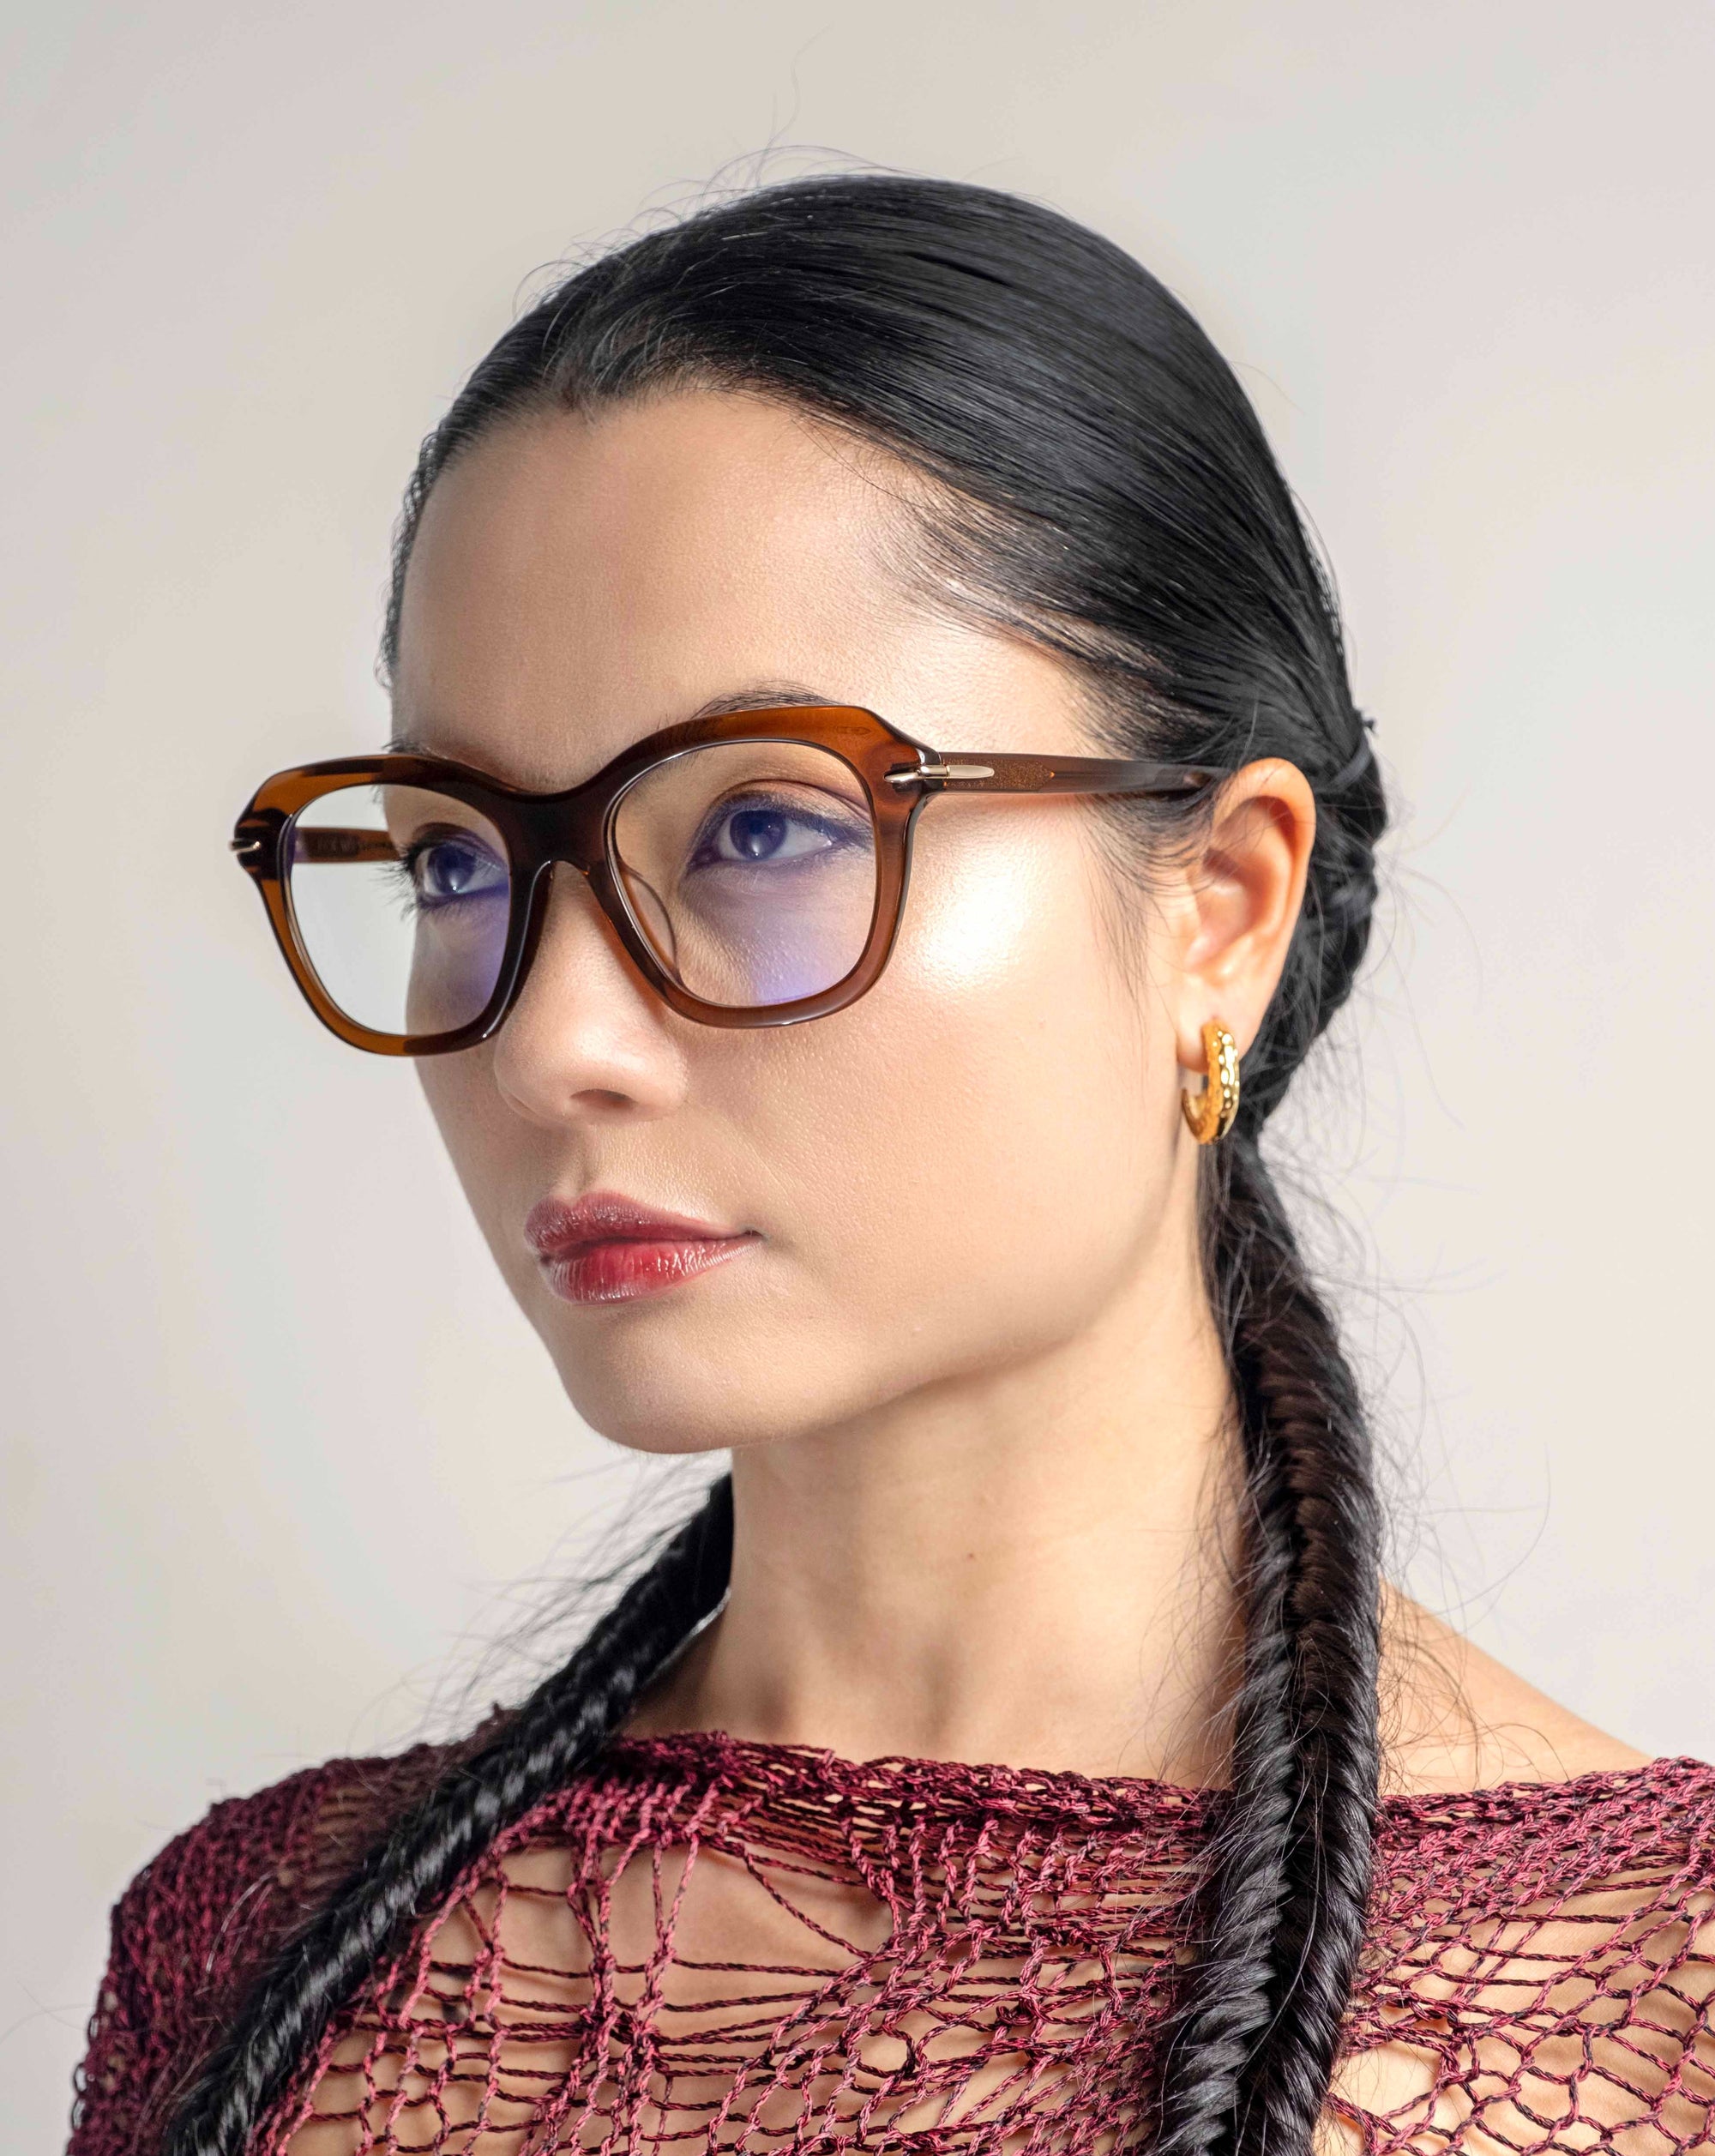 A woman with long, dark hair styled in two braids wears large, brown-framed Helene glasses with a cat-eye silhouette from For Art's Sake® and a gold hoop earring. She has a neutral expression and is dressed in a red, textured garment, with a light gray background behind her.